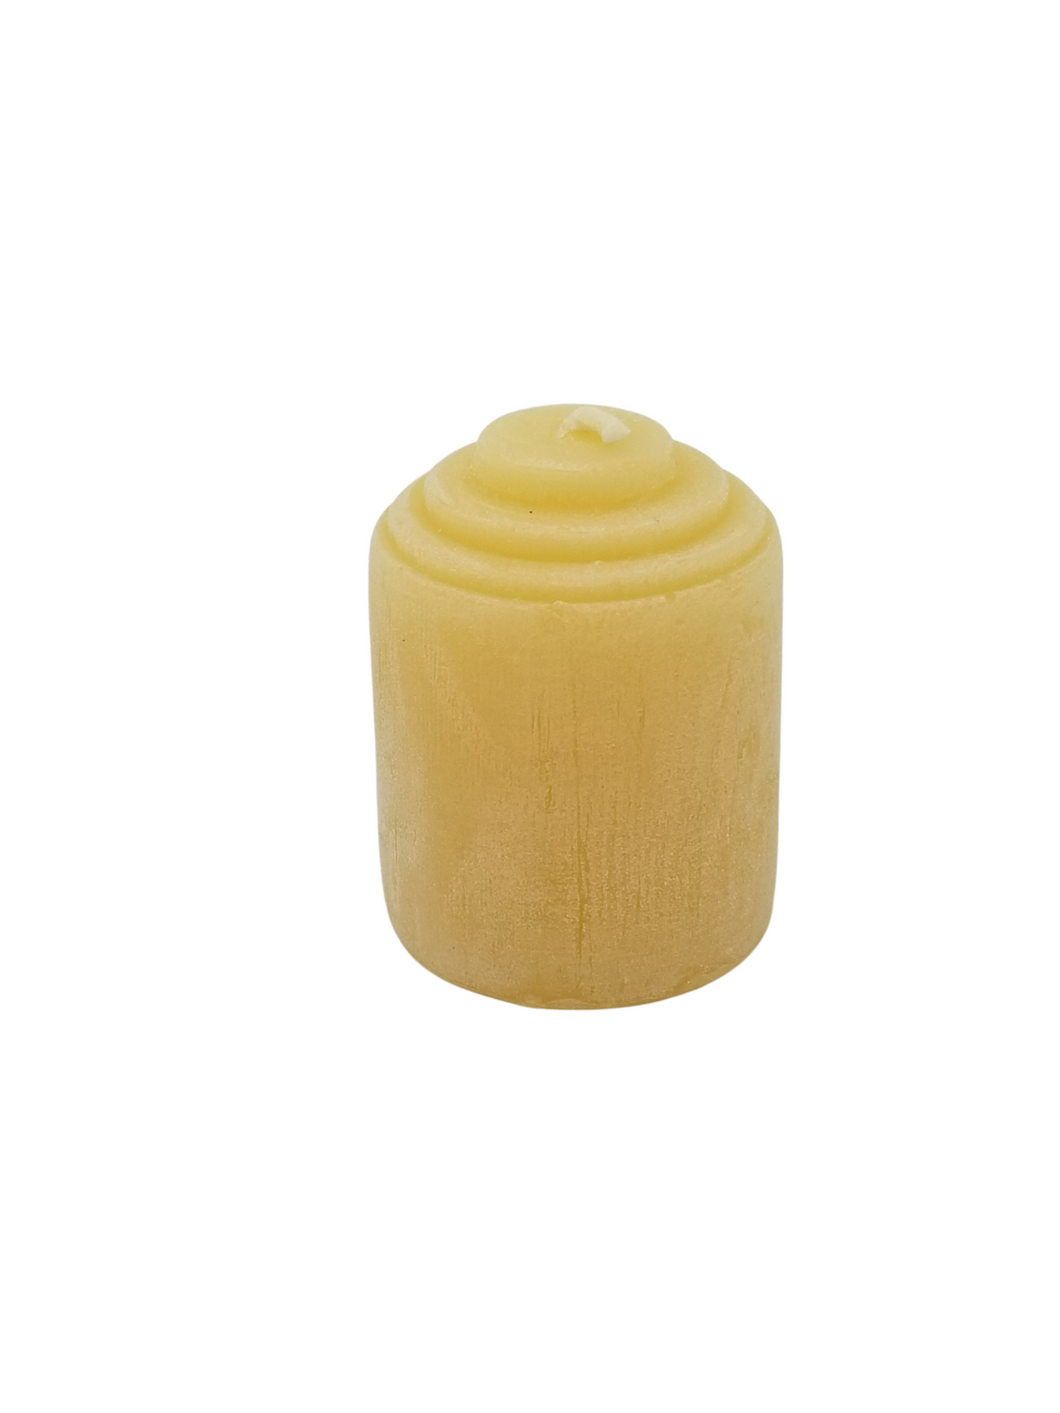 Beeswax Small Votive